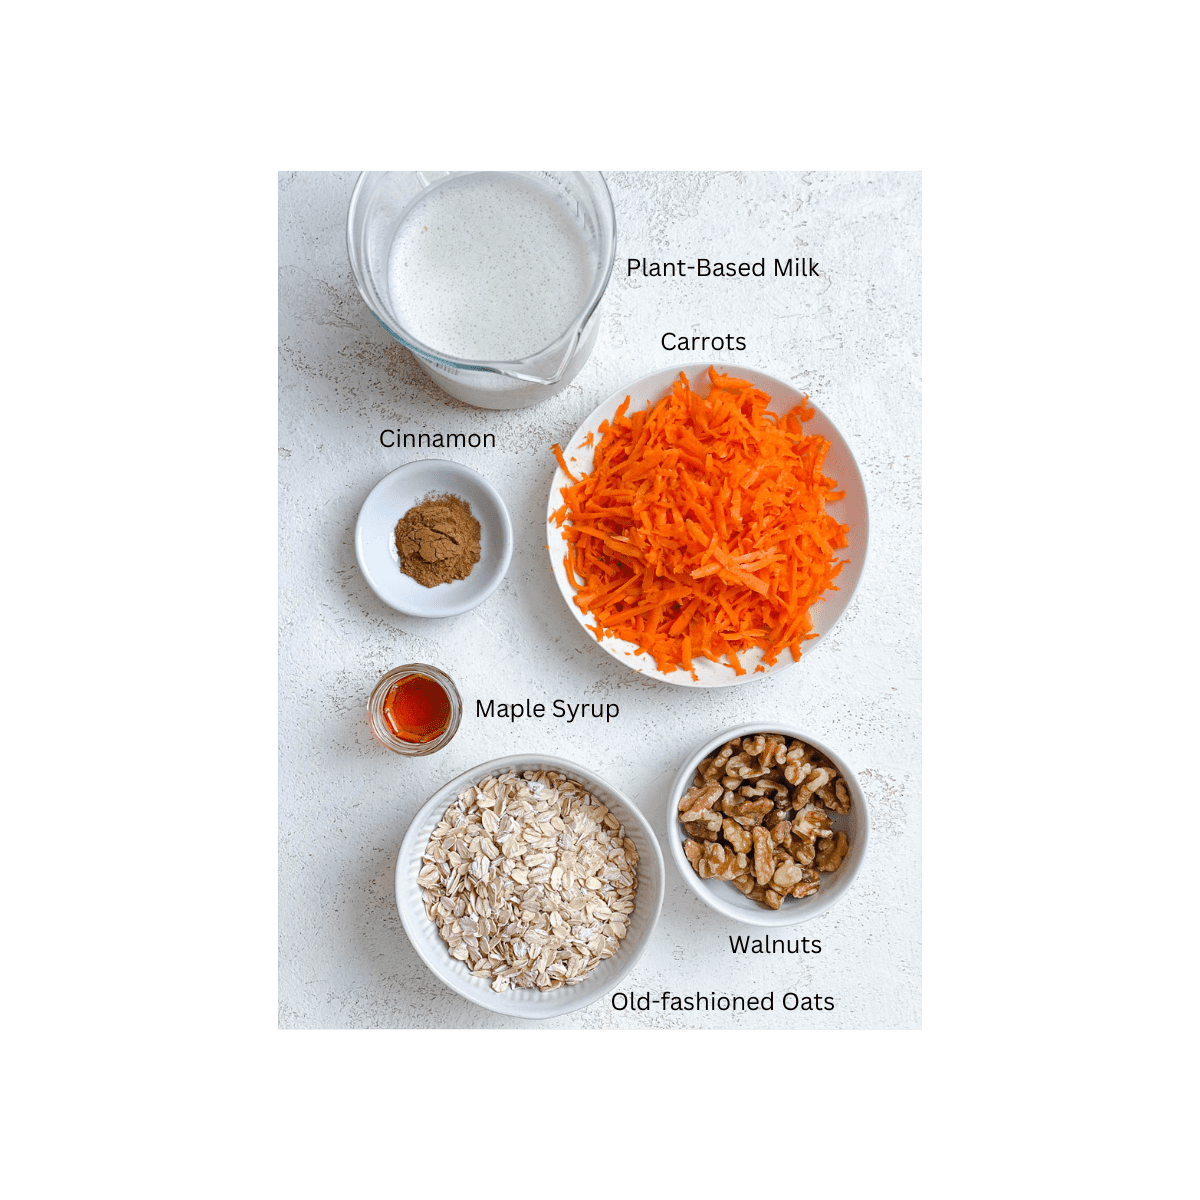 ingredients for Carrot Cake Oatmeal measured out against a white surface